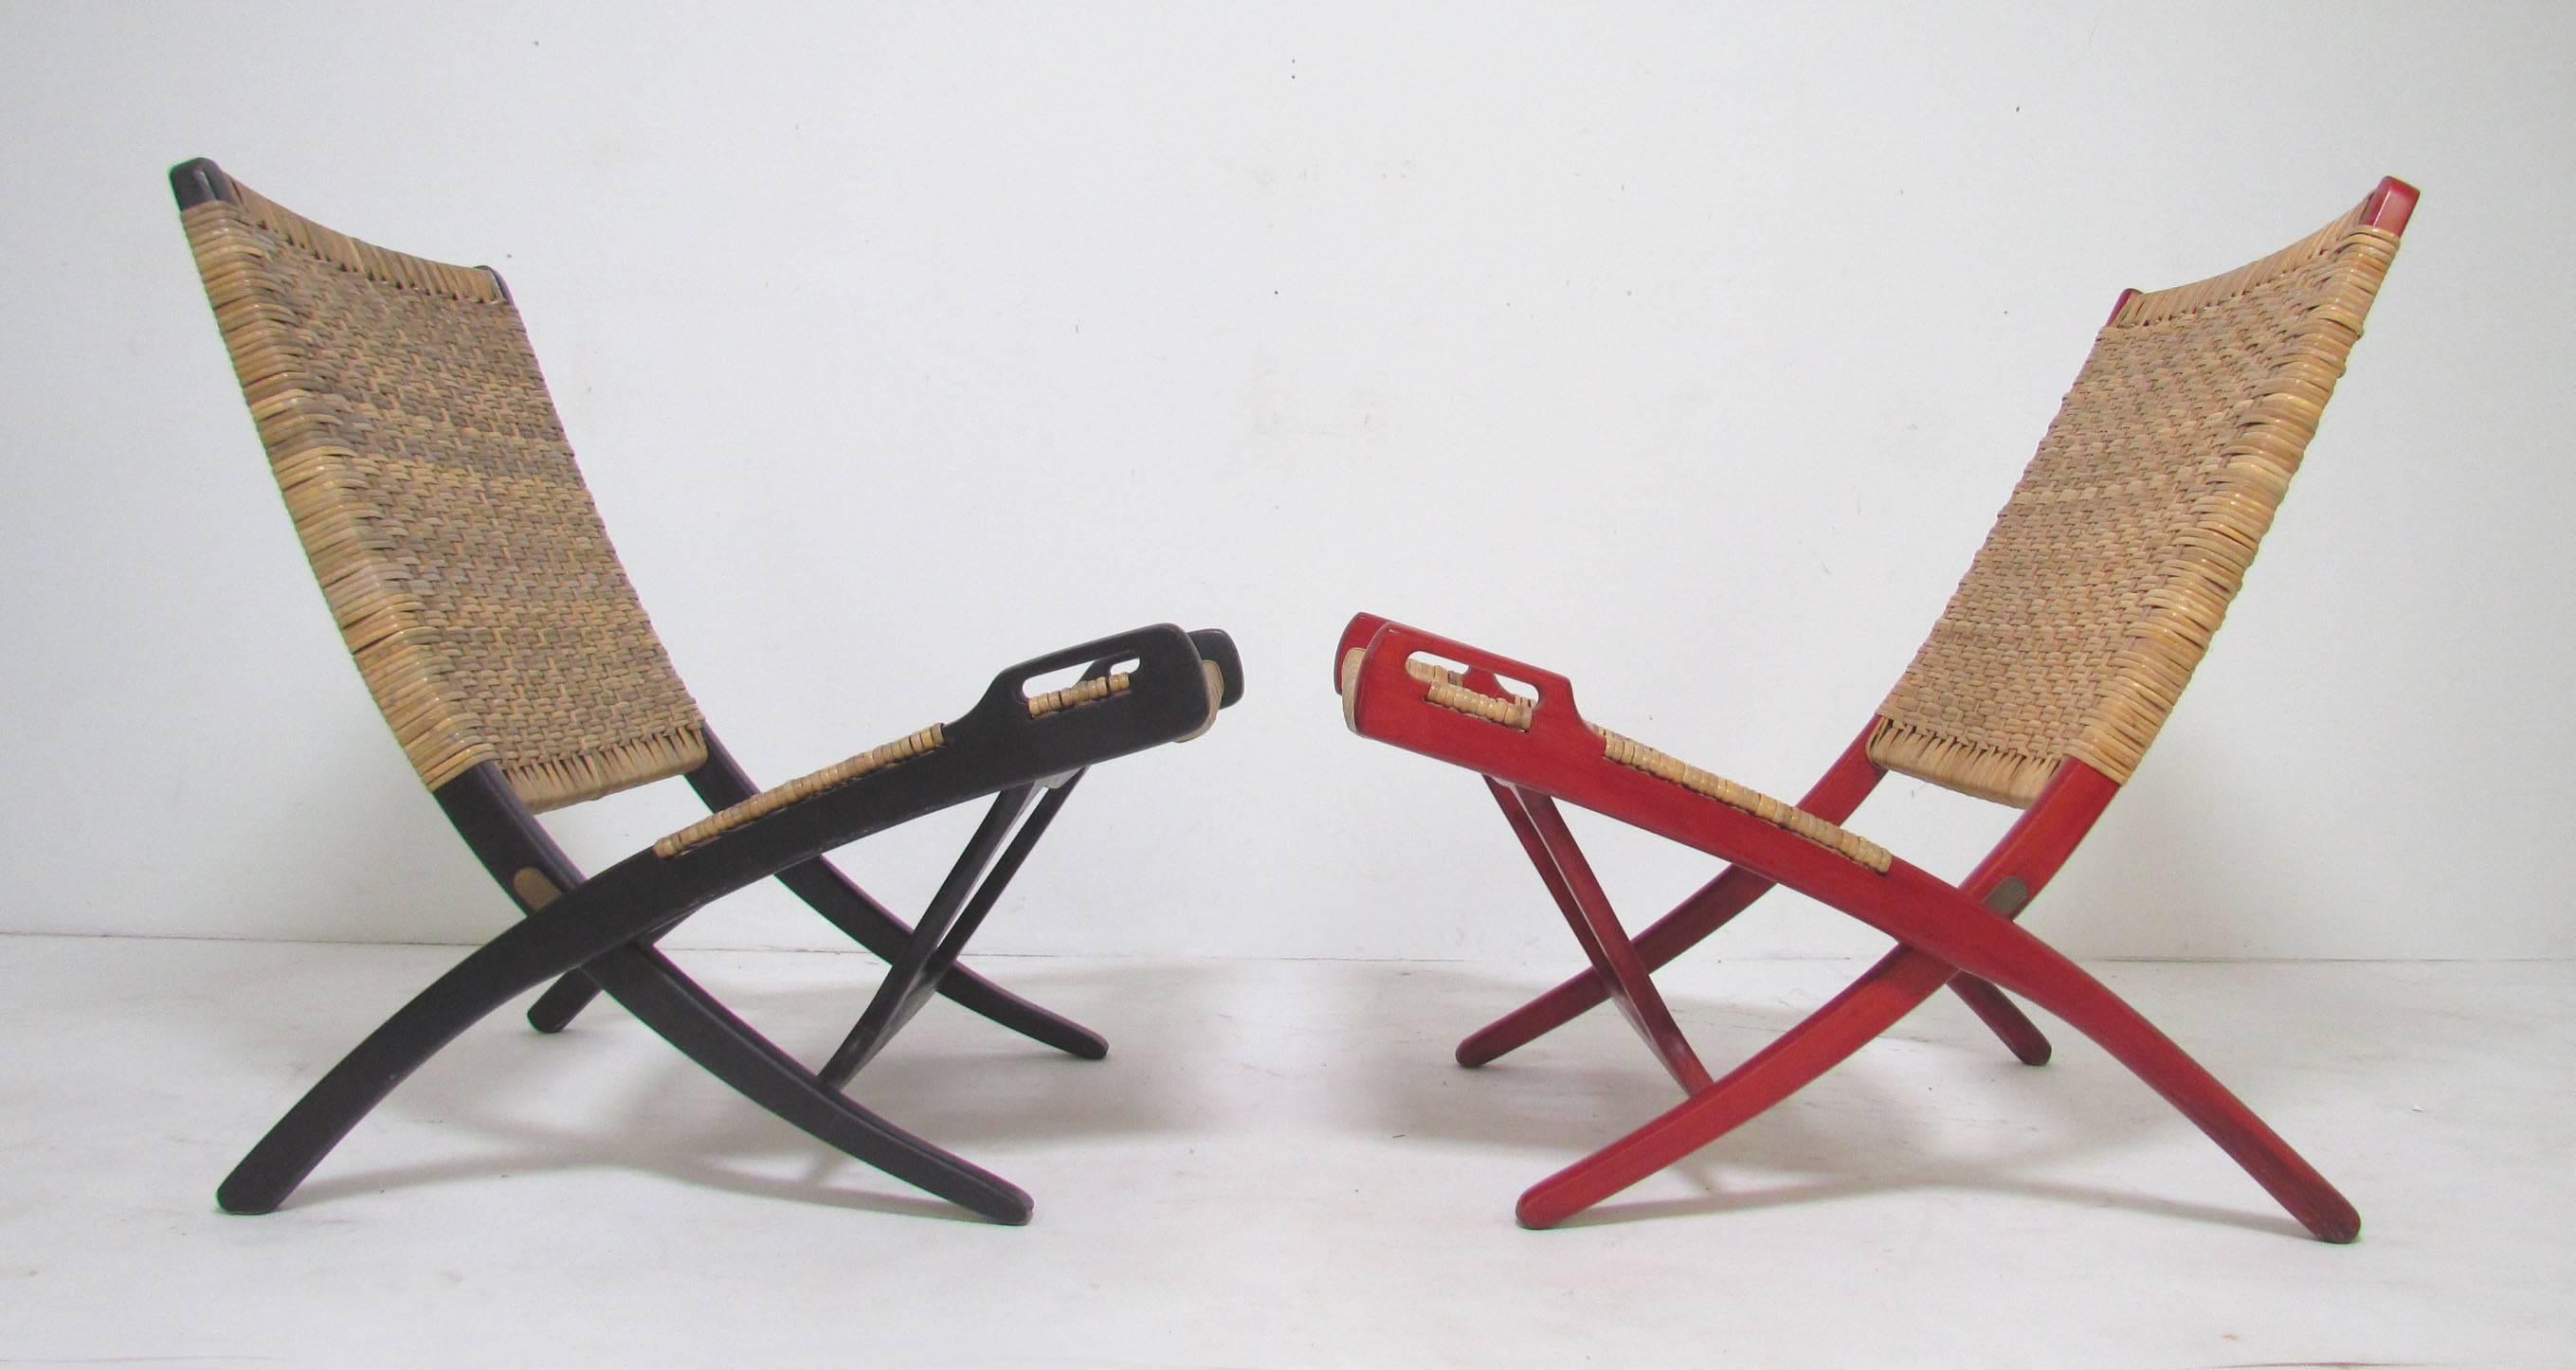 Pair of Mid-Century folding safari chairs in cane with original stained wood frames, in the manner of the iconic folding chair in cane designed by Hans Wegner for Johannes Andersen. 

Unmarked, but attributed to Ebert Wels. Slight nearly